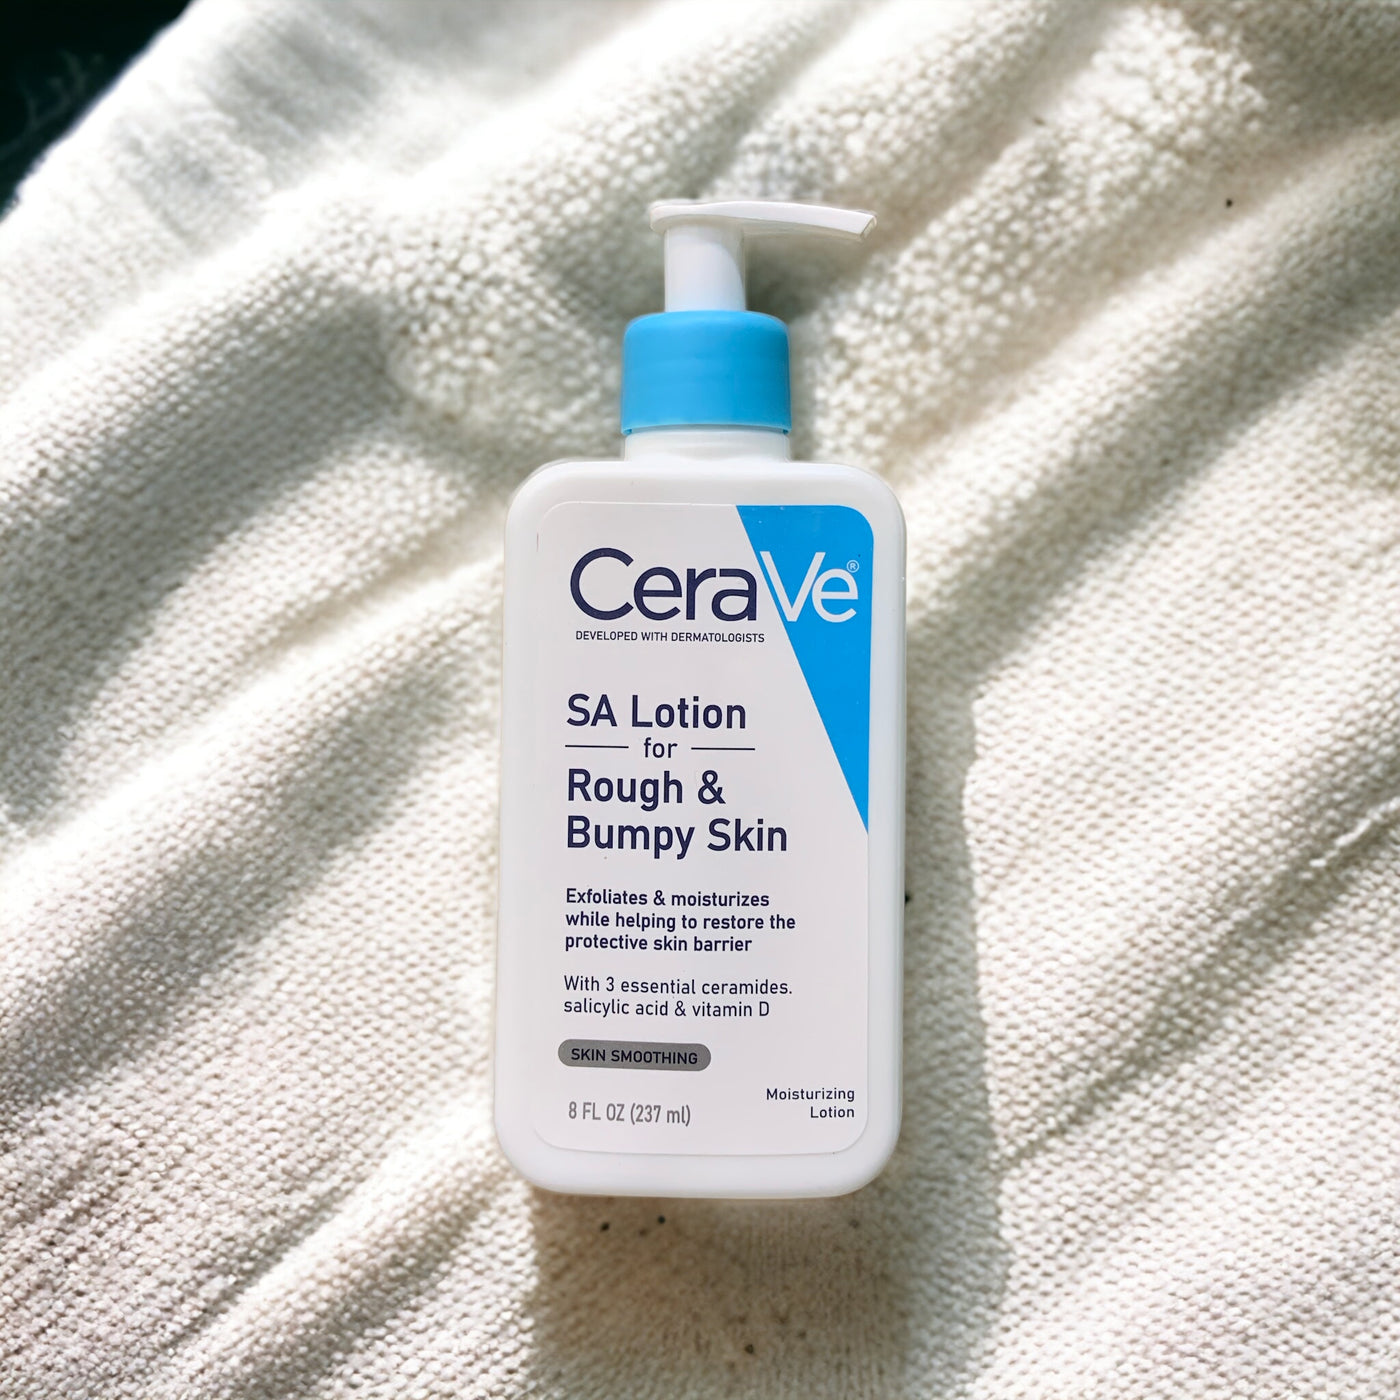 CeraVe SA Lotion For Rough & Bumpy Skin